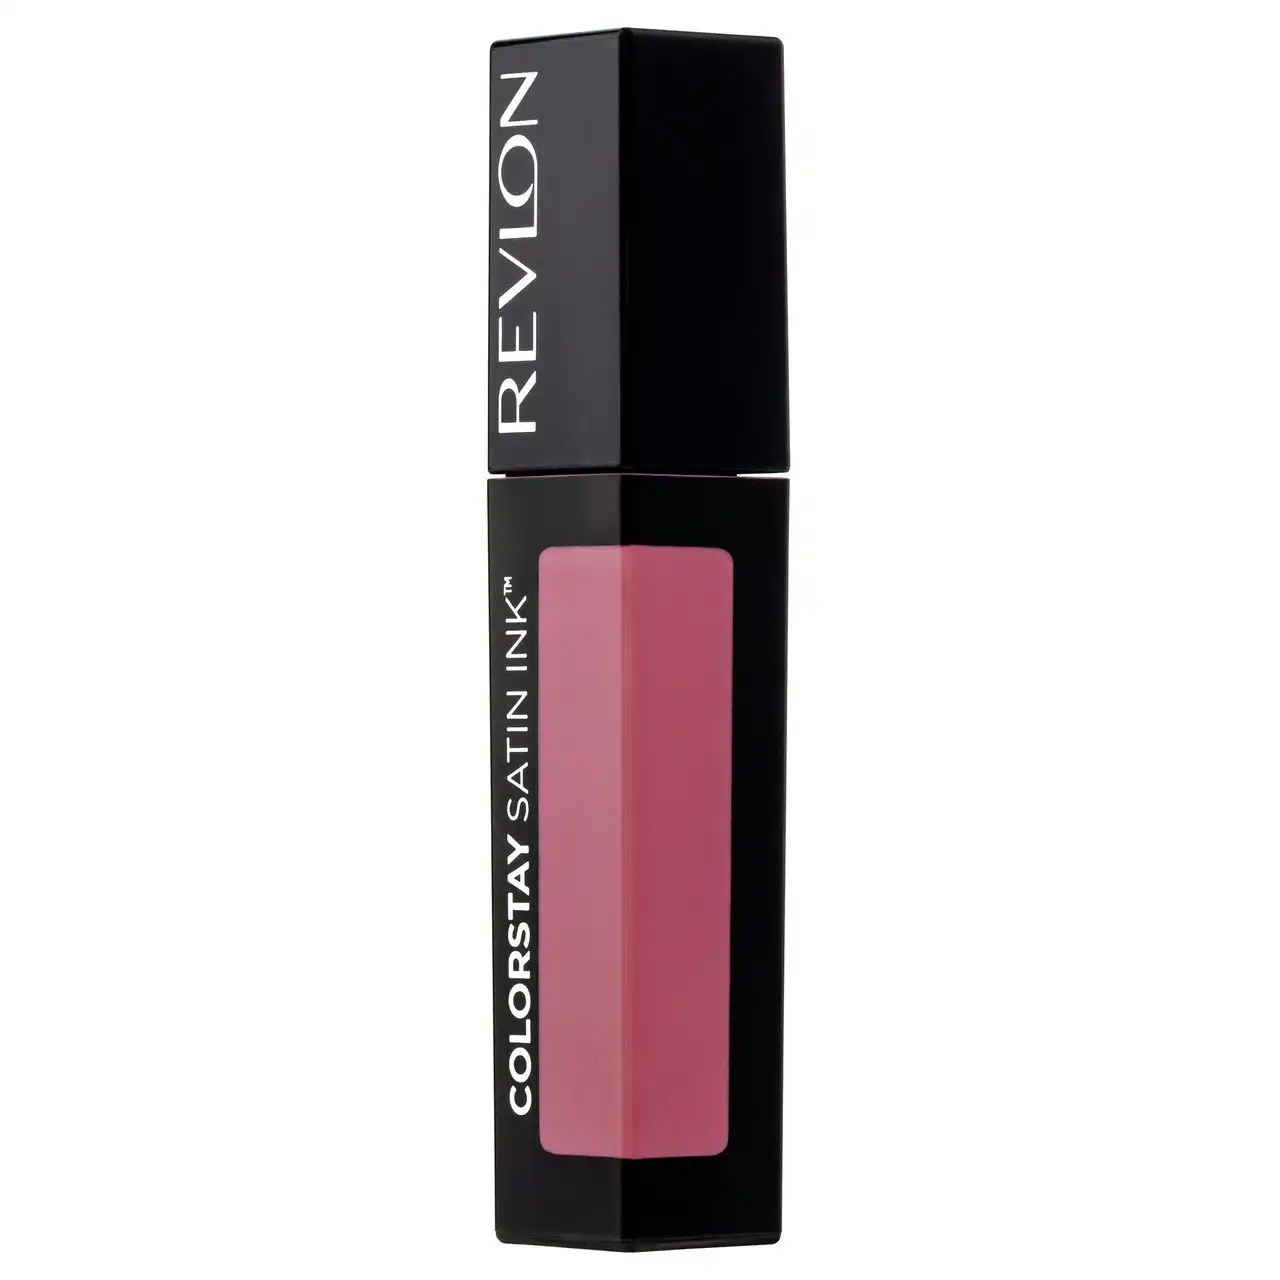 Colorstay Satin Ink Lipcolor Mauvey, Darling 50mL